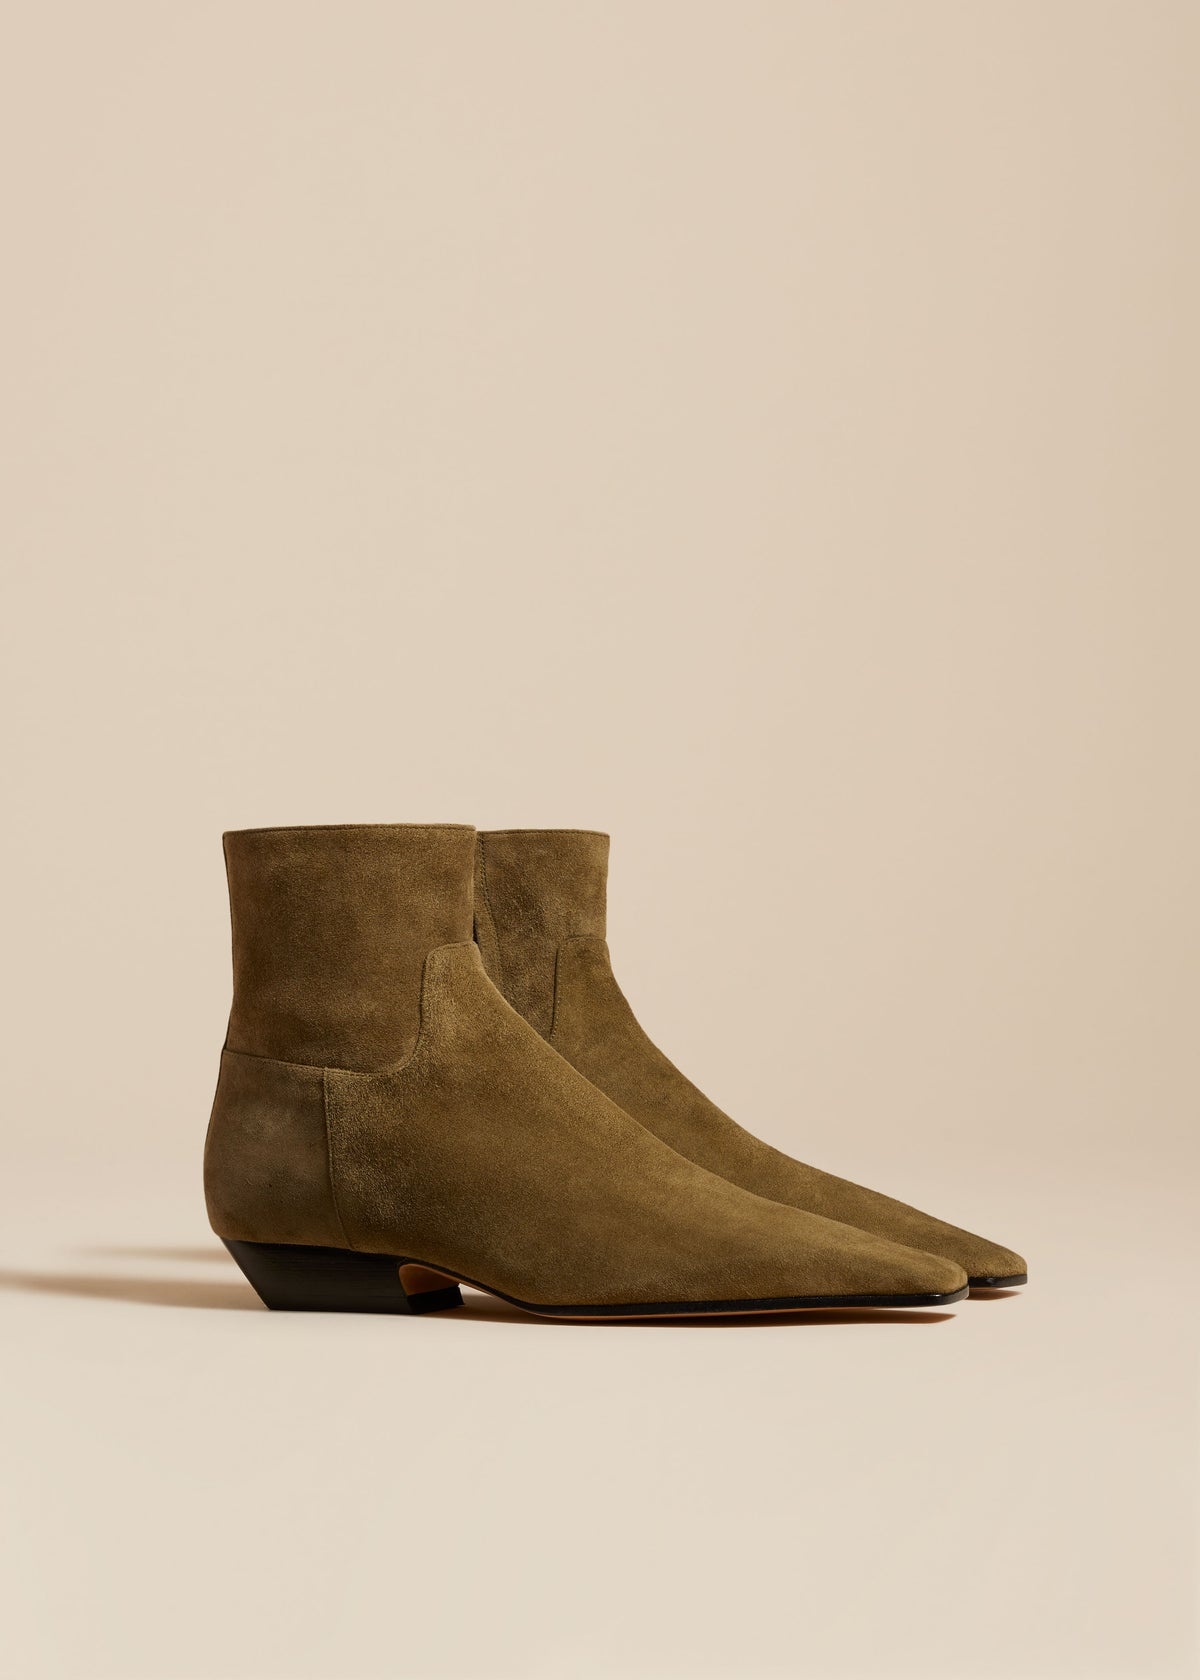 The Marfa Ankle Boot in Khaki Suede - 2